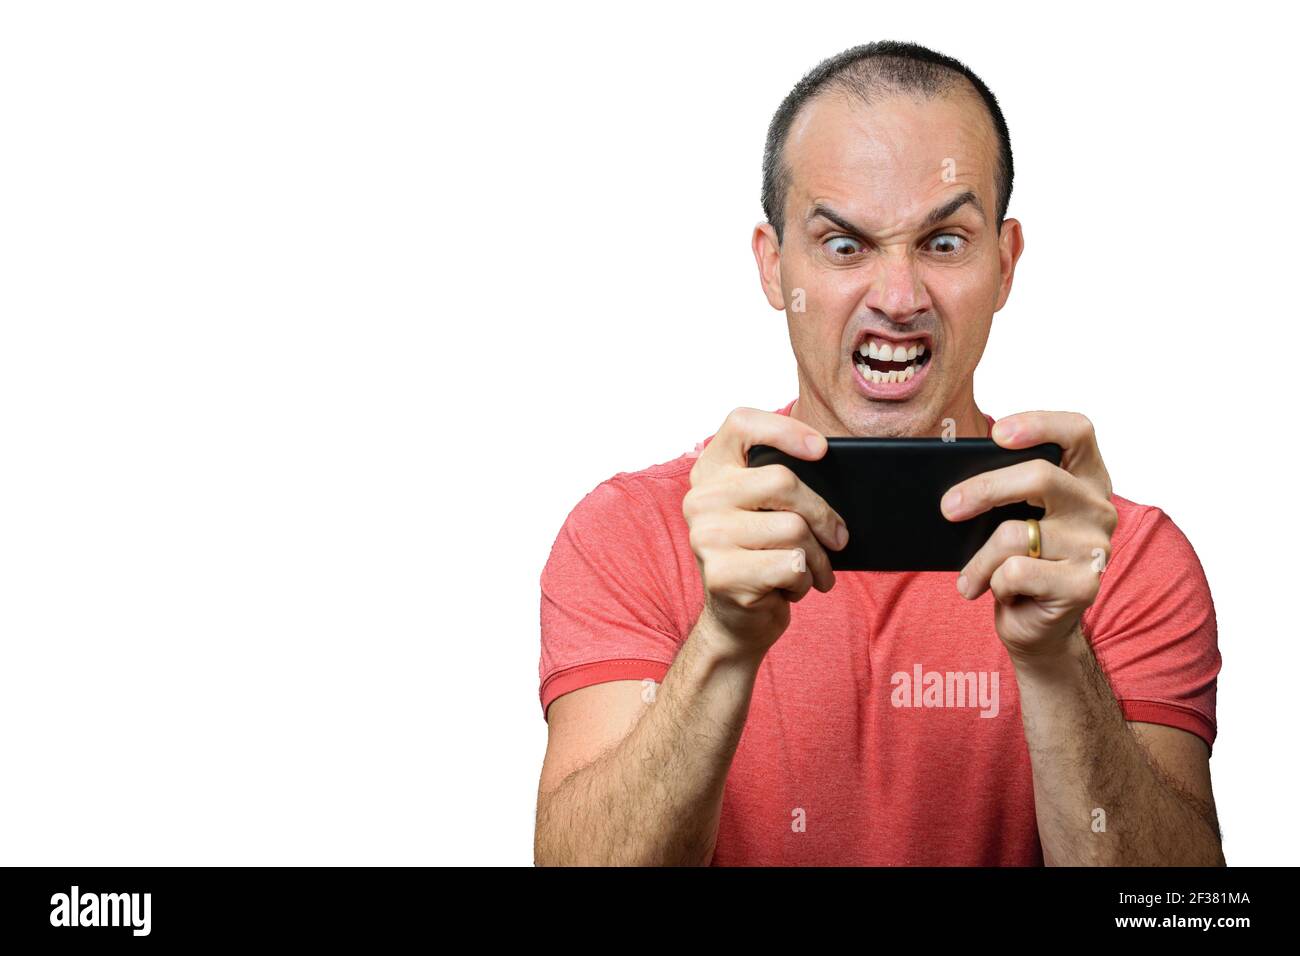 Mature man in casual clothing, with angry expression and holding smartphone horizontally. Stock Photo